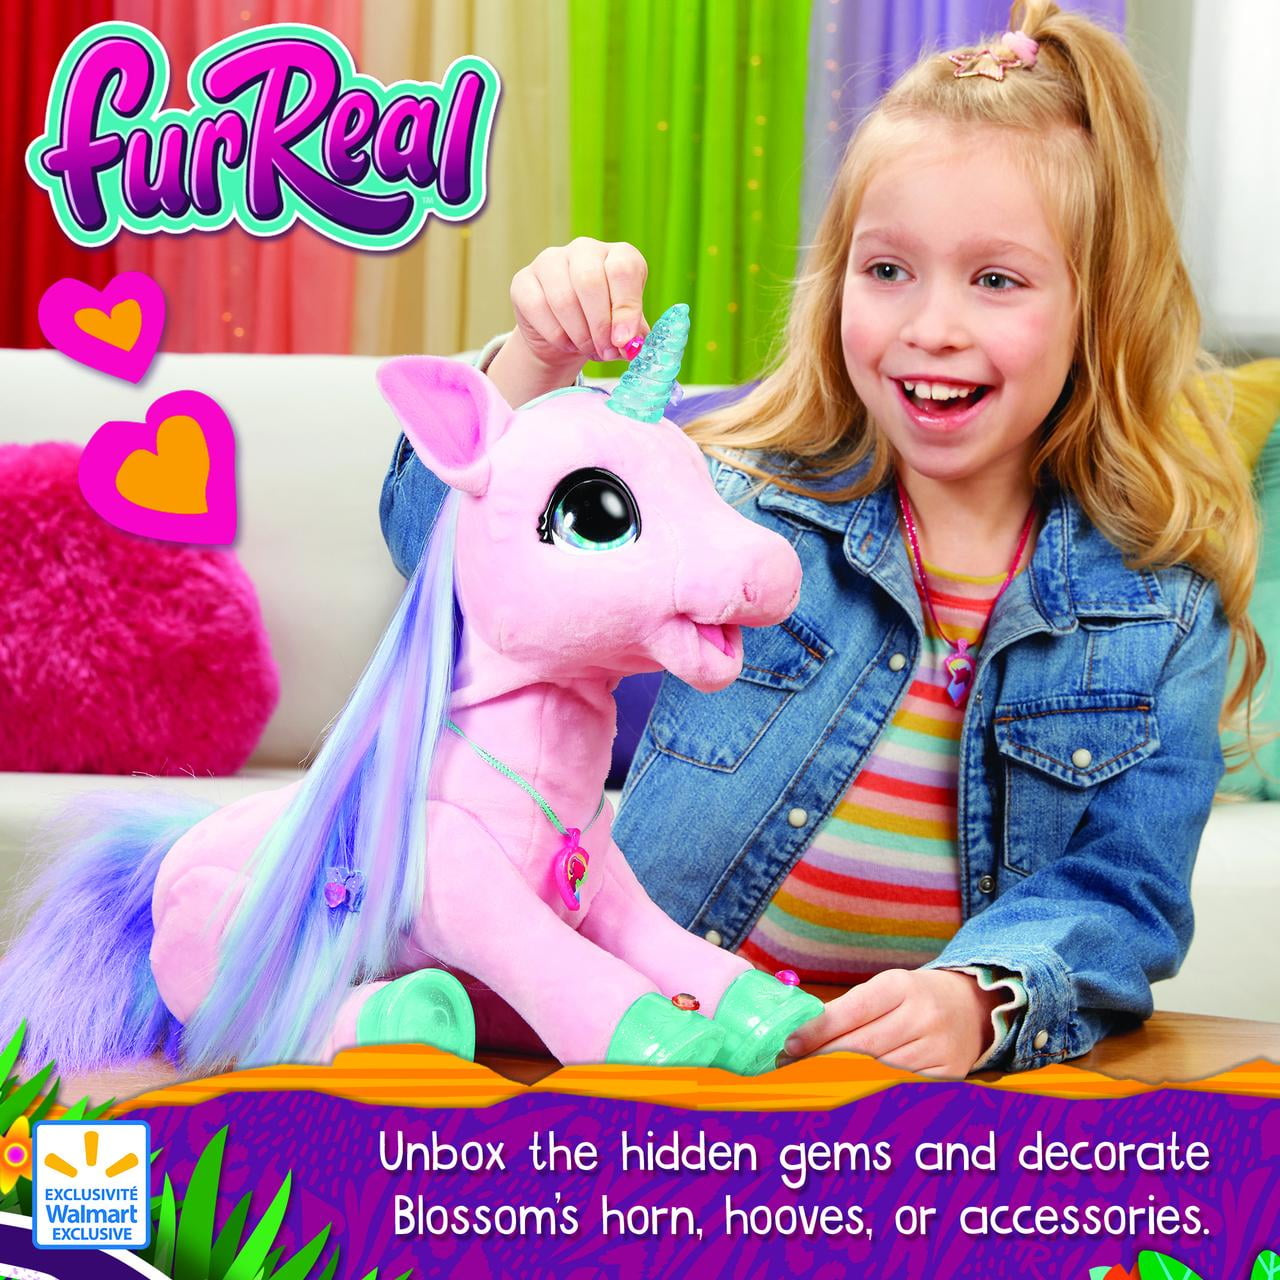 FurReal Friends Blossom My Bestiecorn Unicorn Christmas Toy for sale online